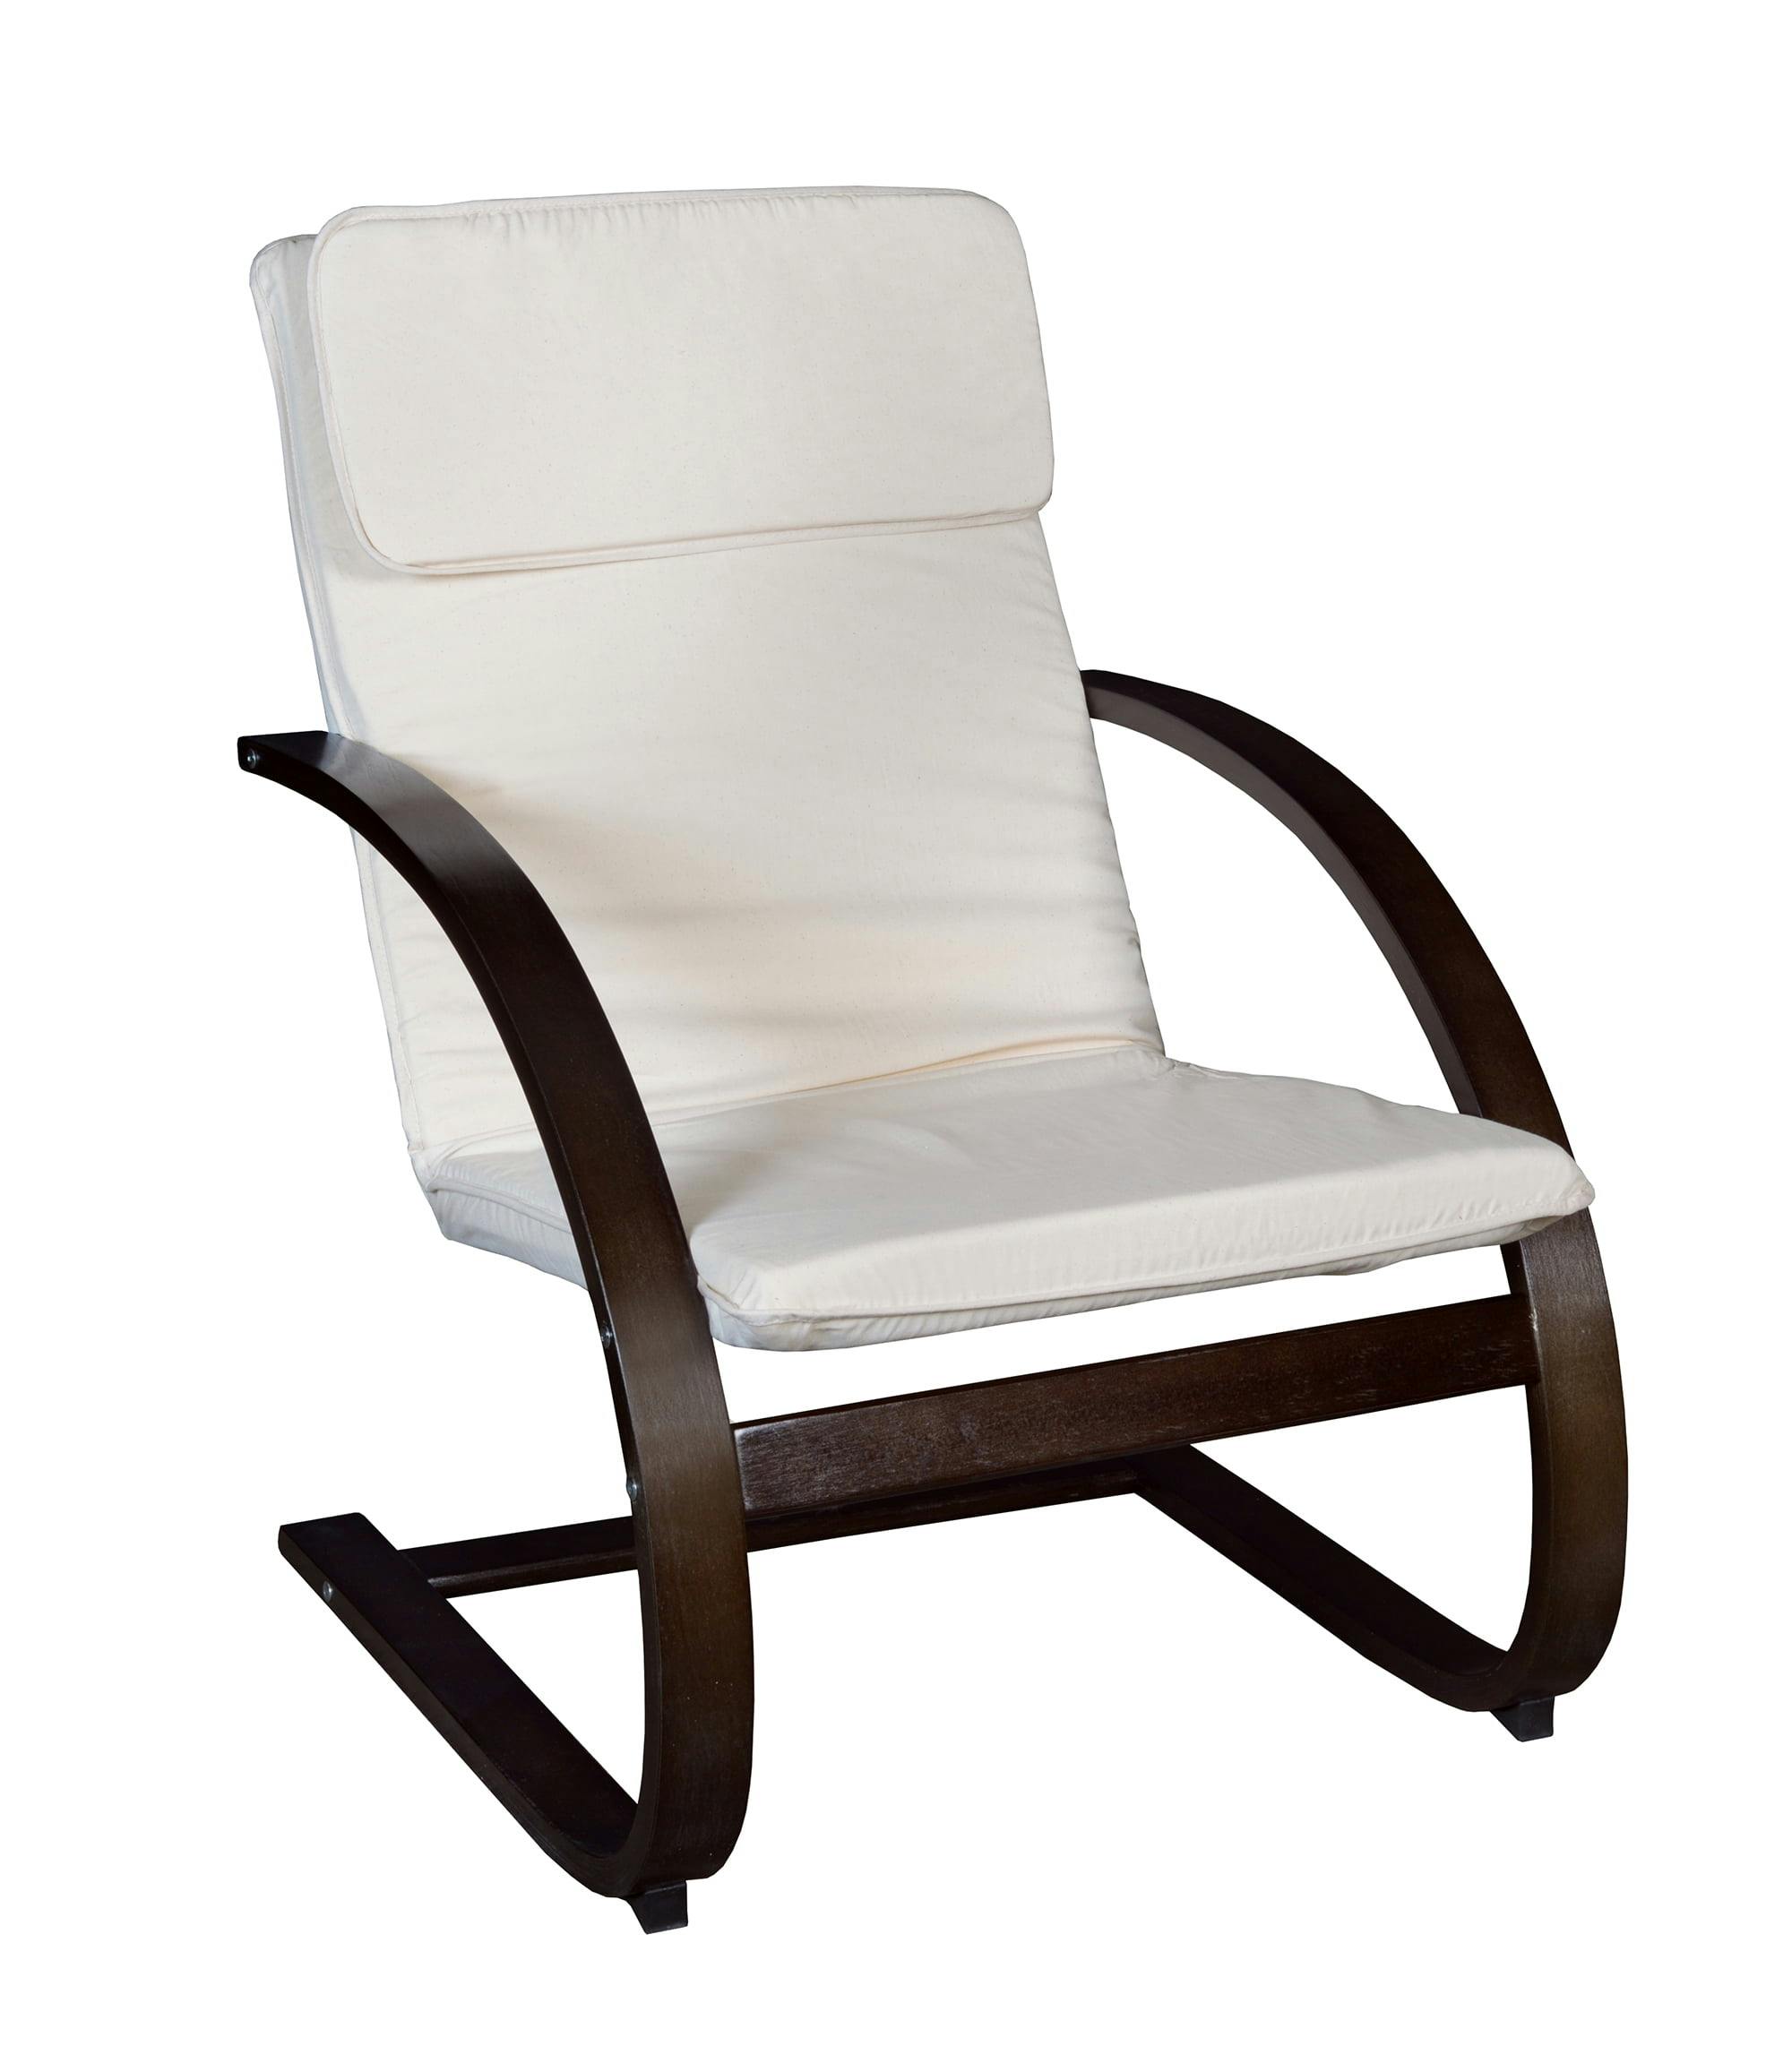 Mocha Walnut & Beige Cotton Recliner with Removable Cover